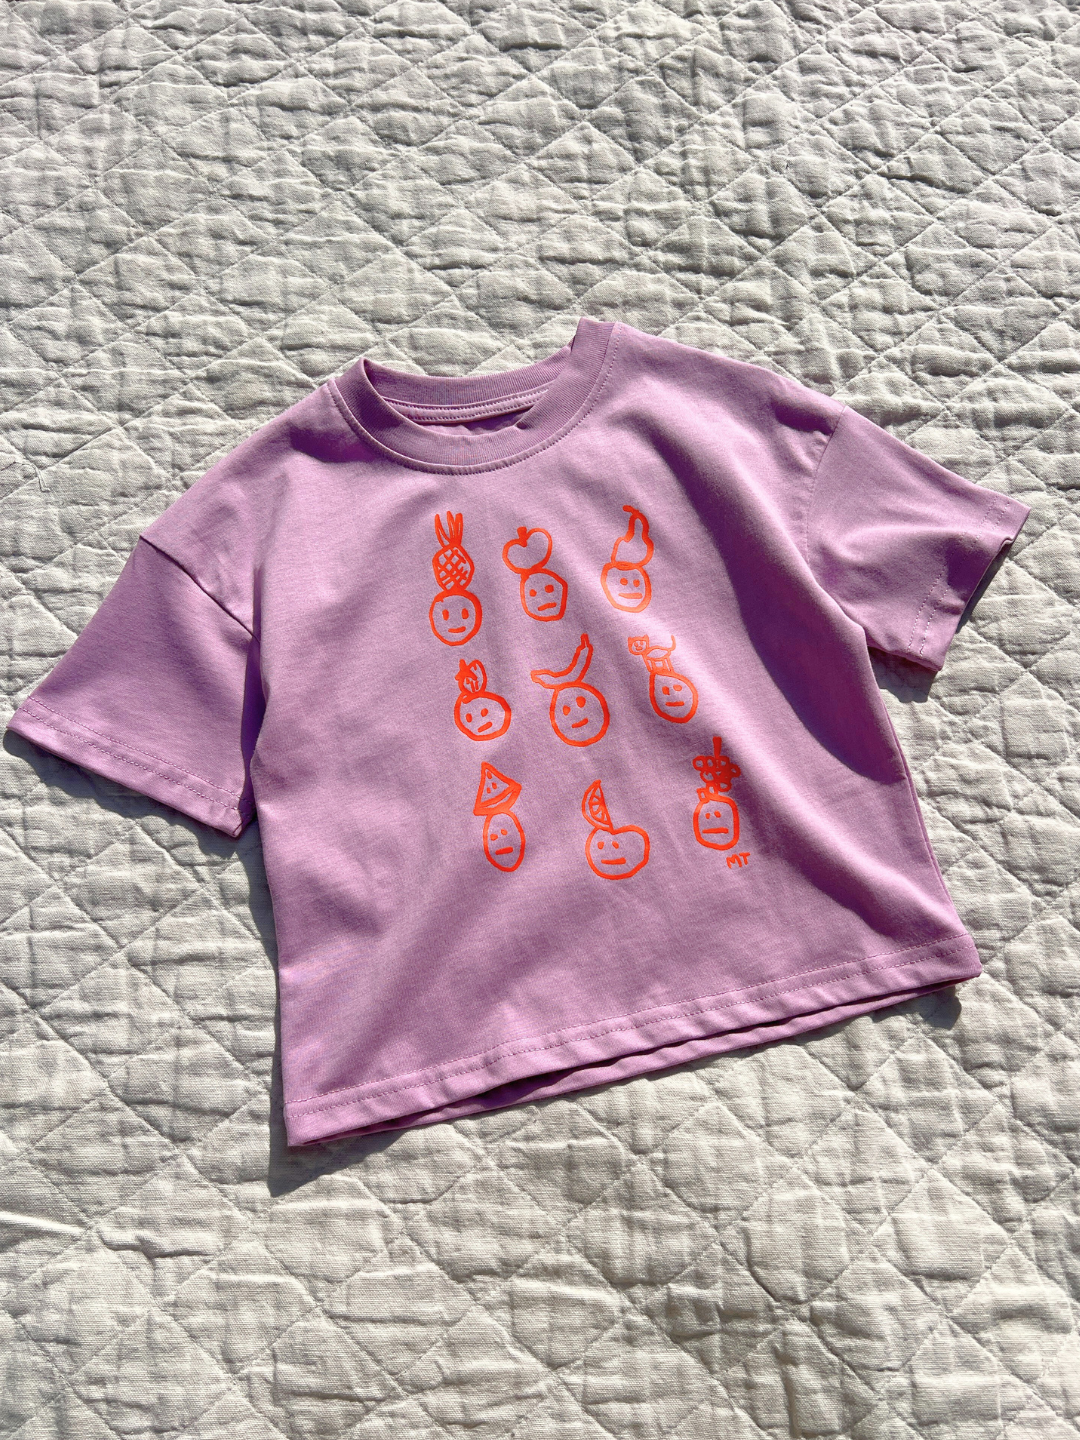  A kids' Fruit Face tee in violet is laid flat on a quilt in the sun.